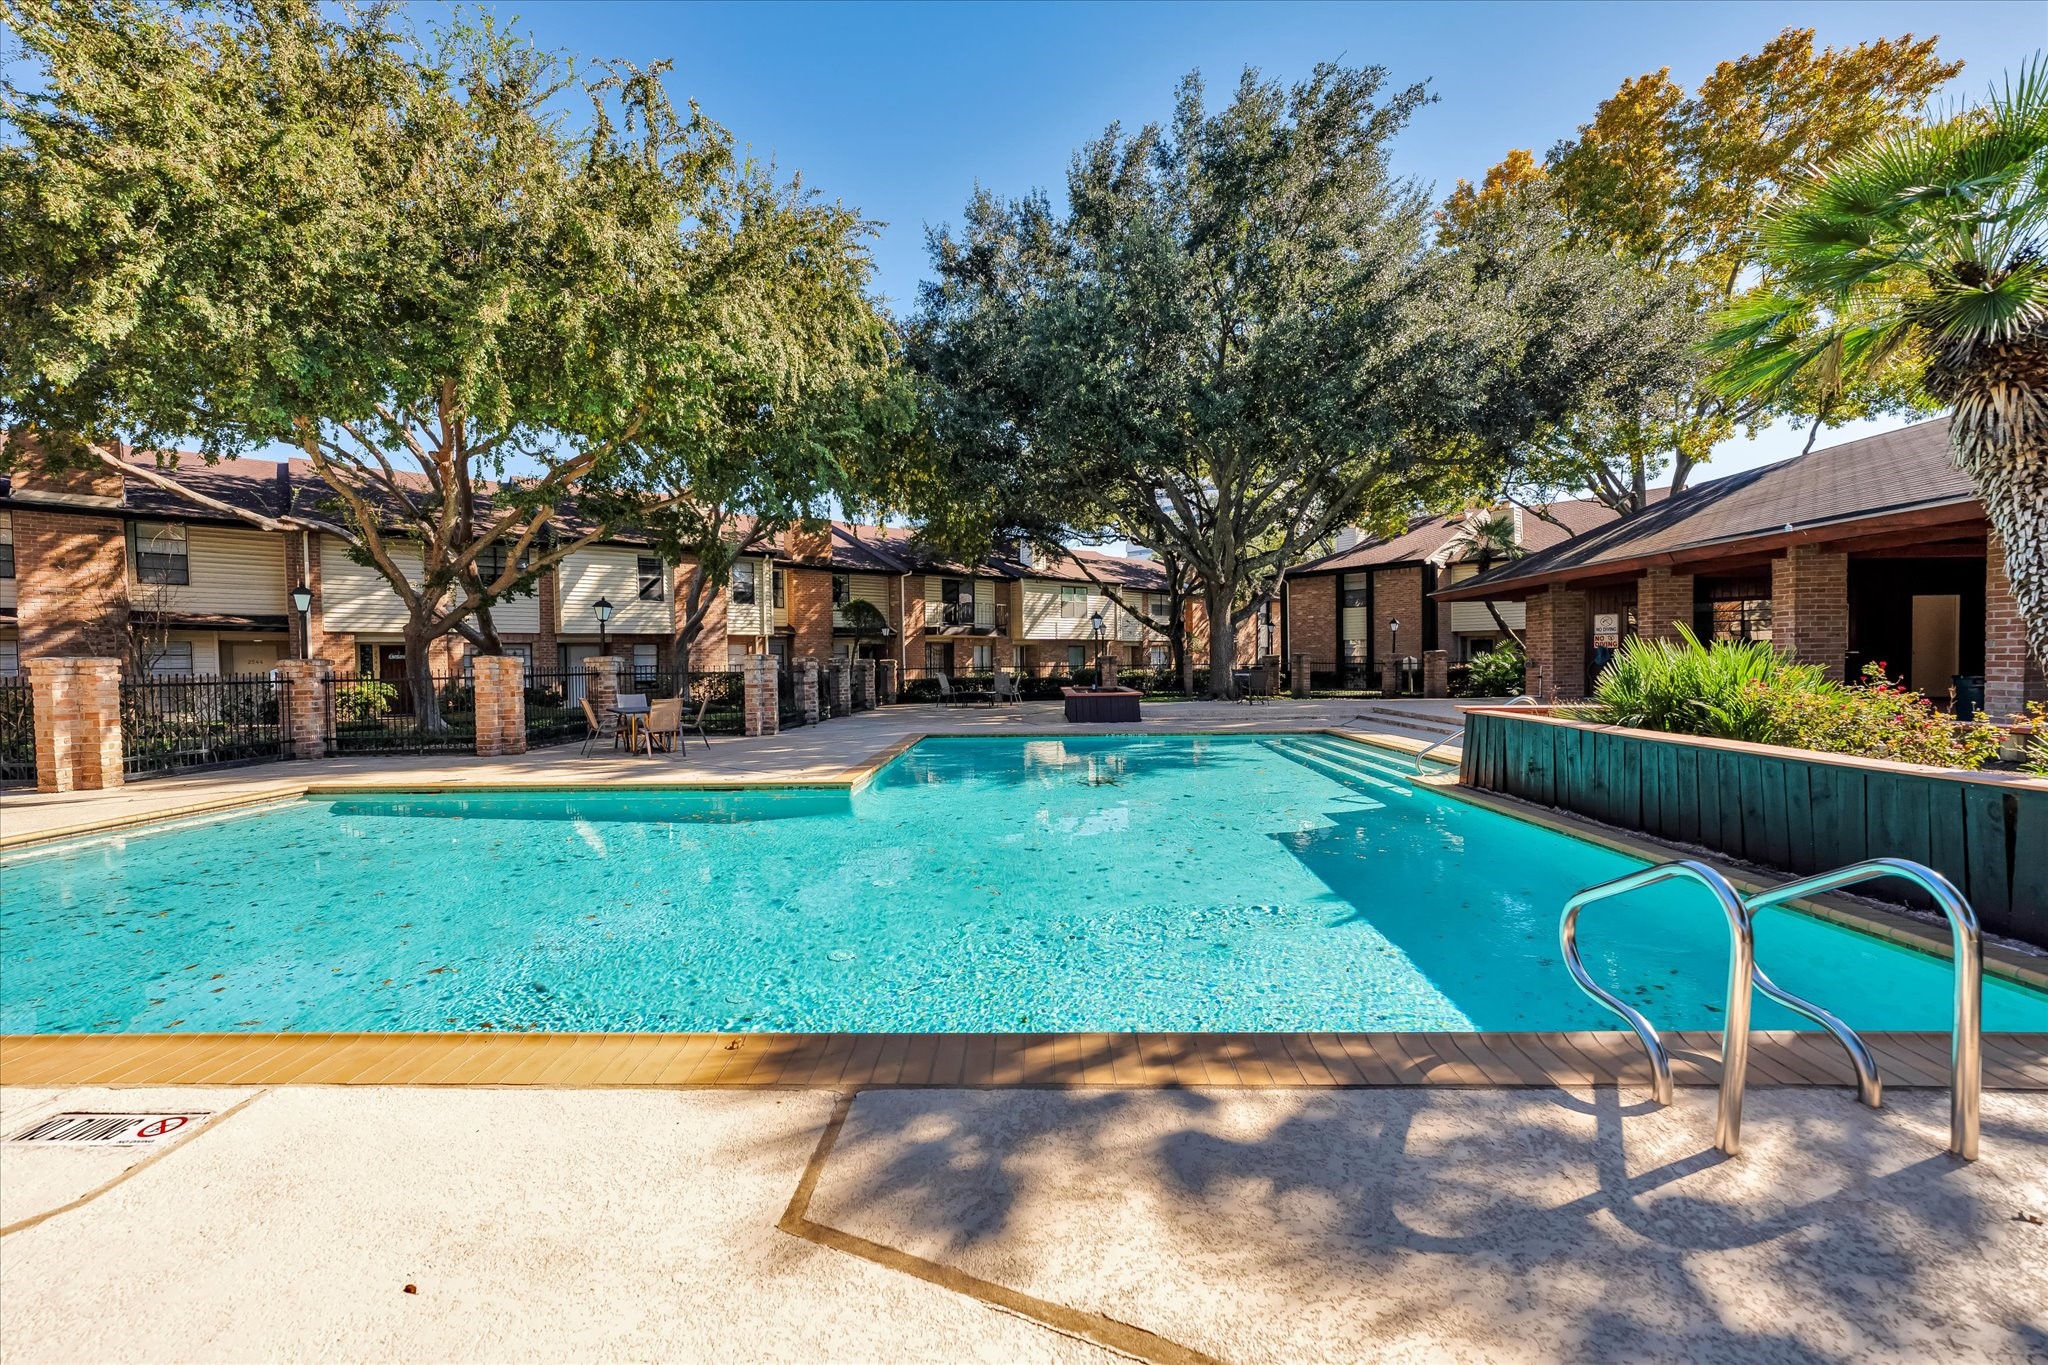 Right across the street you can enjoy a limited access pool, providing a refreshing escape from the Texas heat. Surrounded by a well-maintained deck and plenty of trees, the pool area is a private oasis for relaxation and recreation.